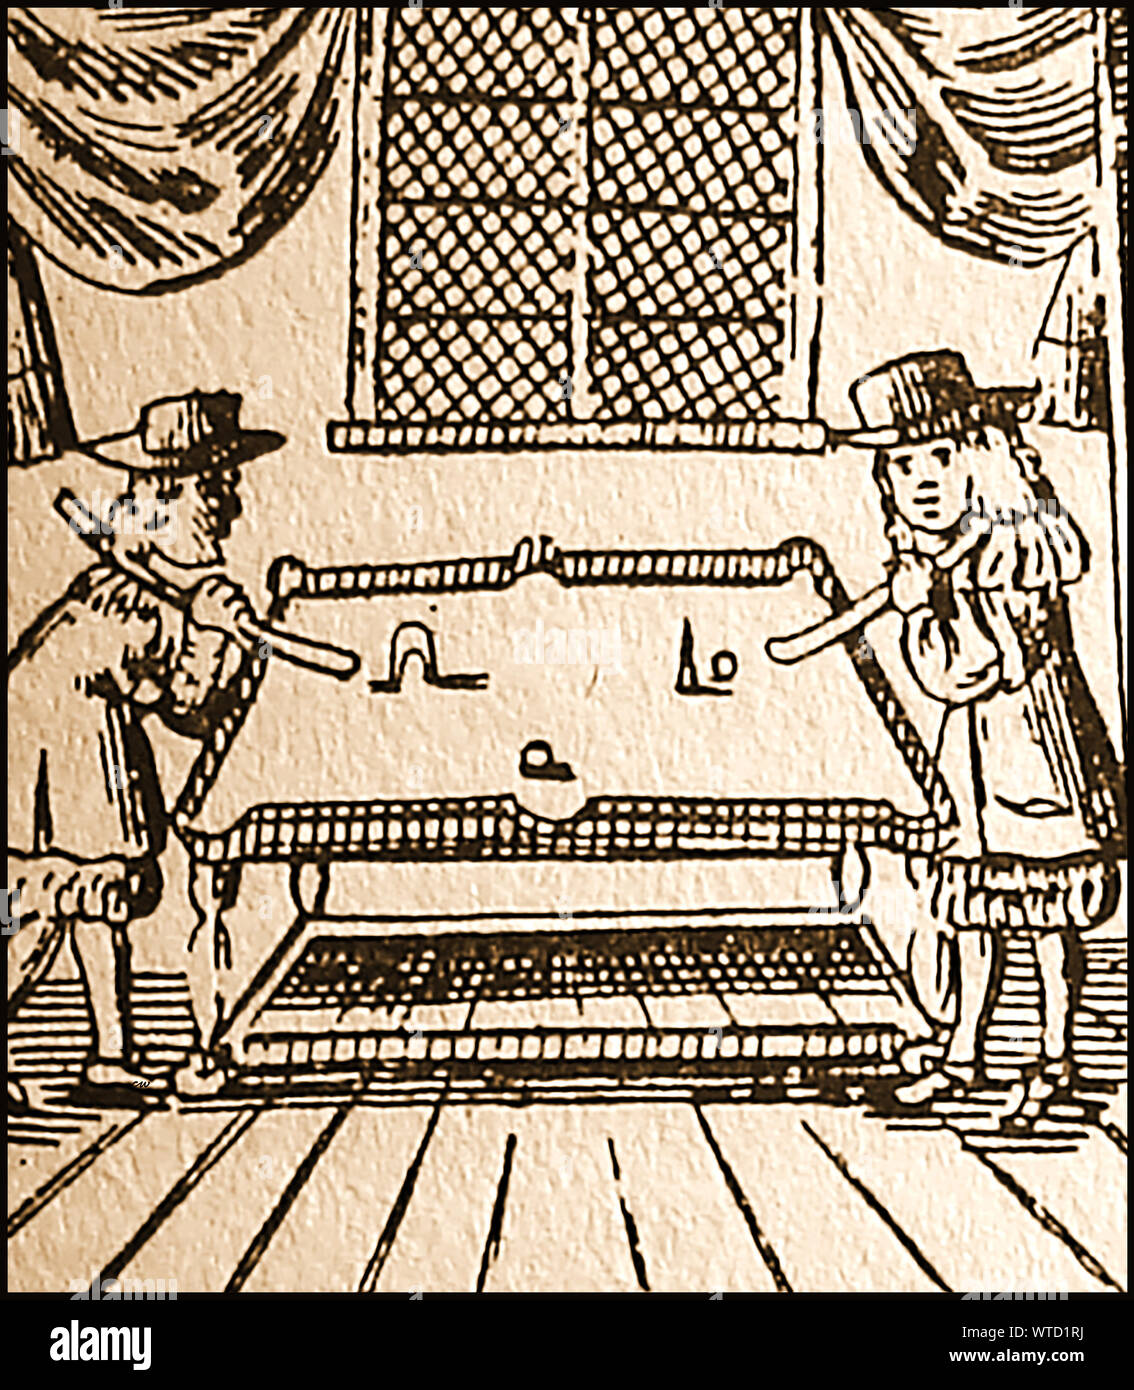 17th century games and pastimes in Britain - A woodcut from the time showing people playing table-croquet Stock Photo